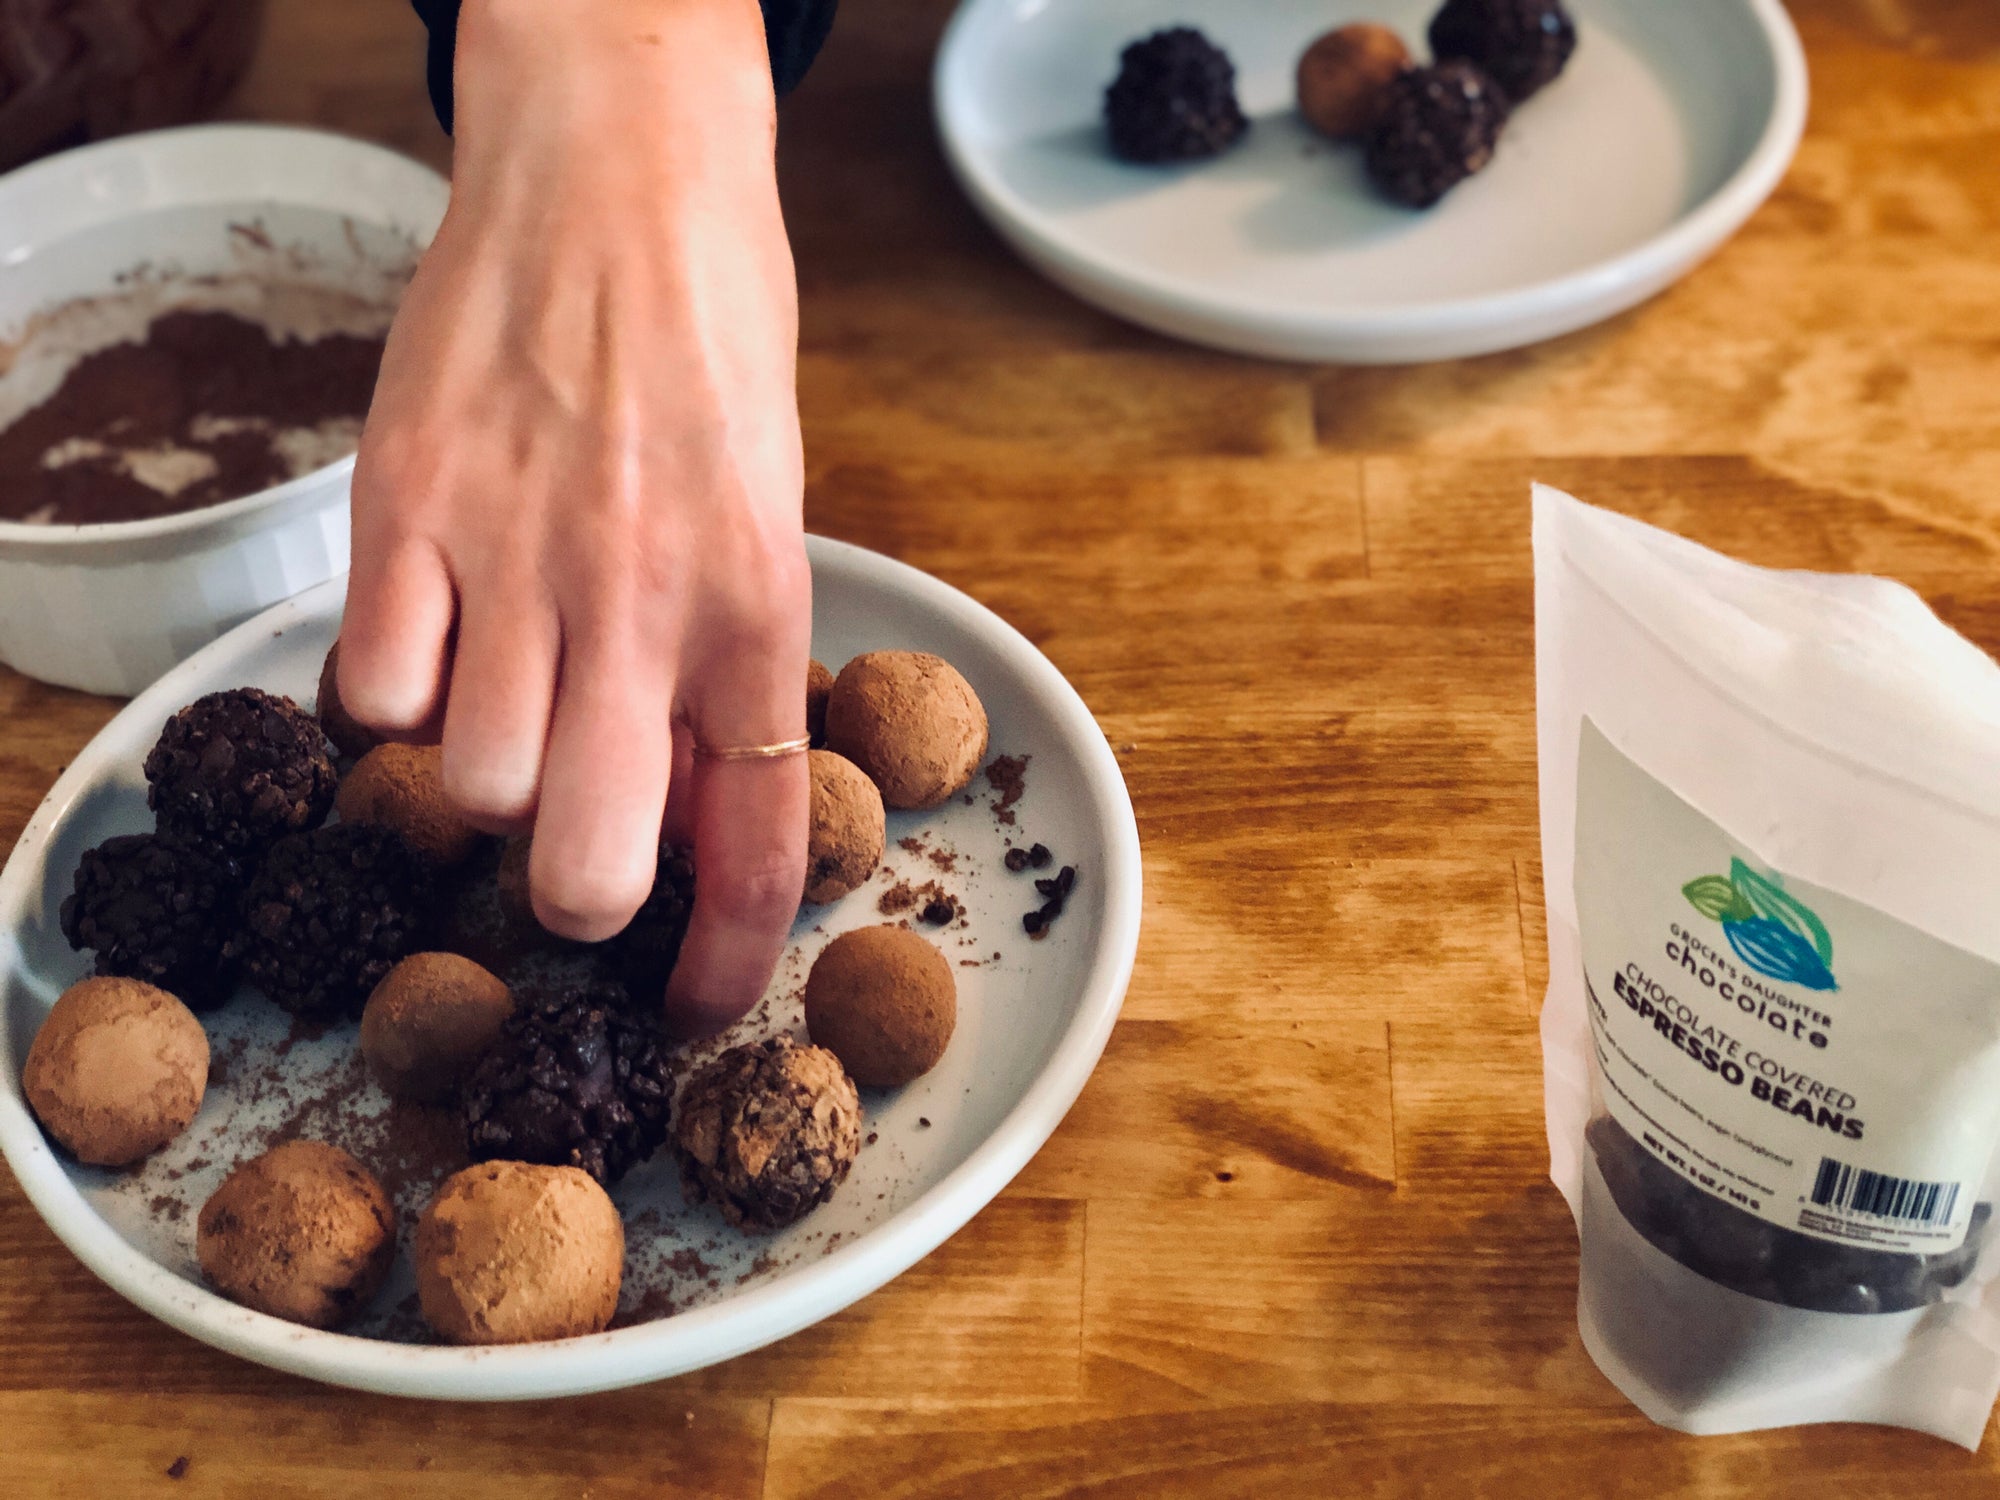 How to Make Truffles at Home